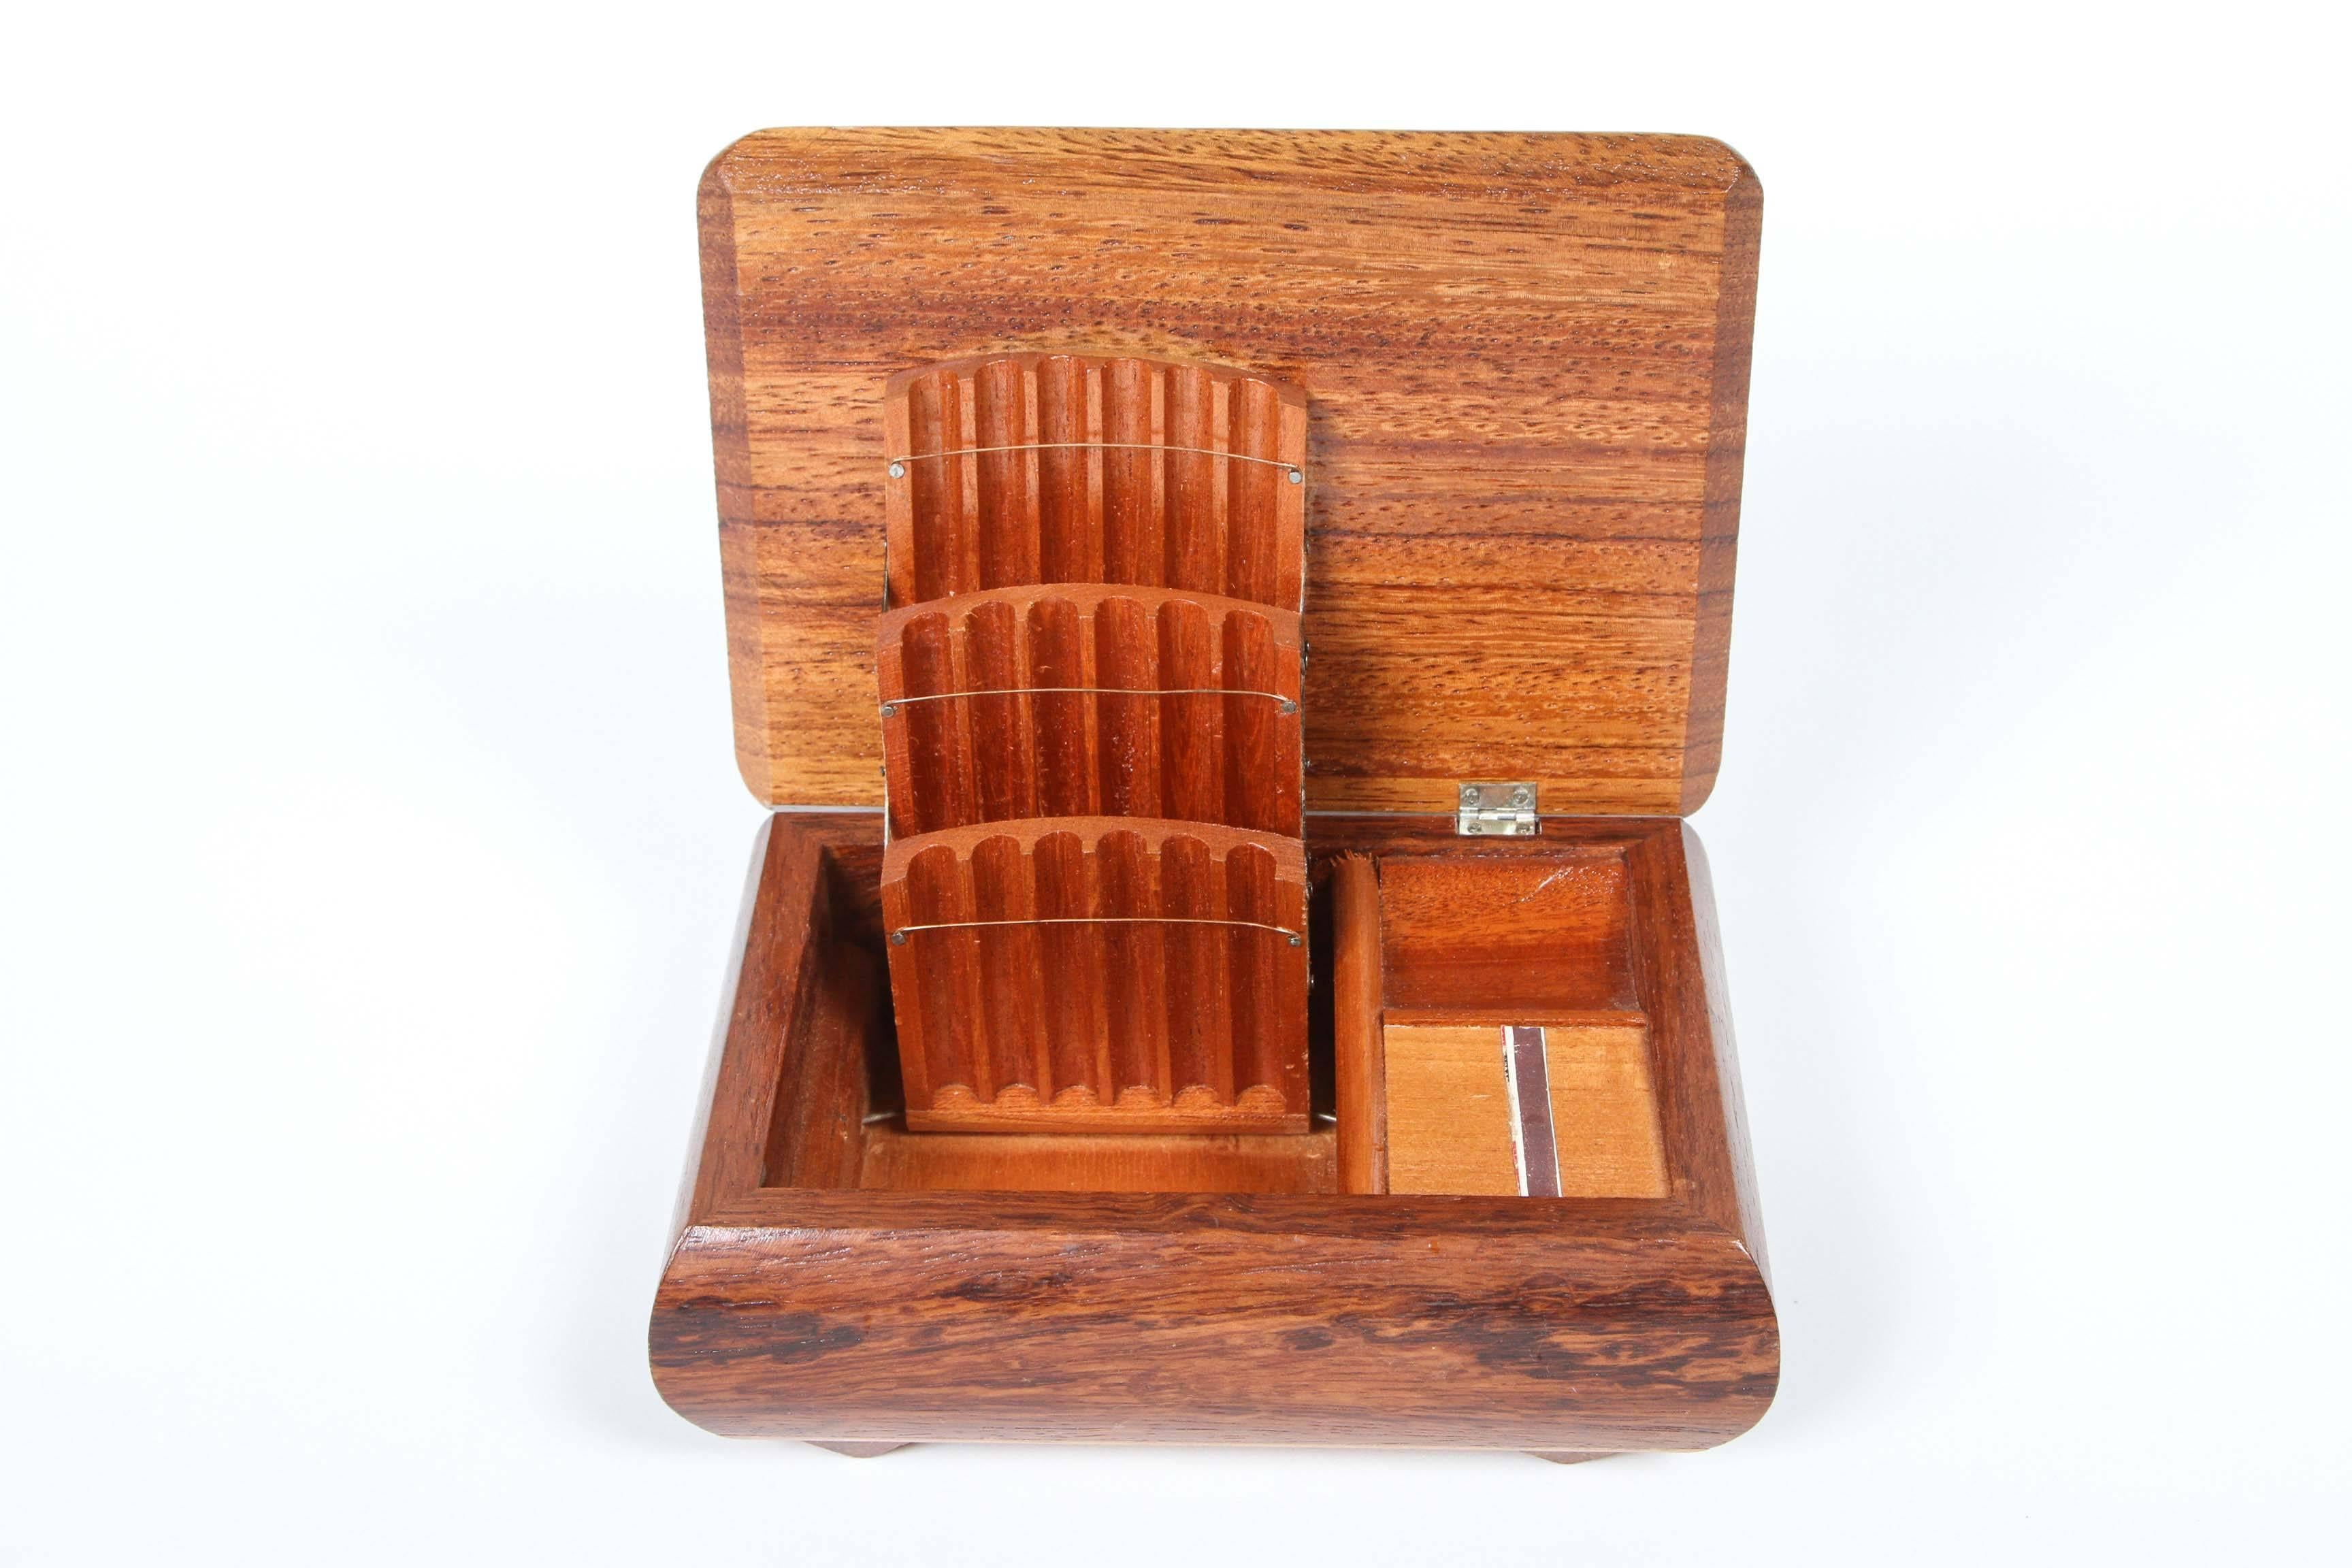 Vintage wood cigarette box with match holder and strike. There are three rows which hold 18 cigarettes and fold in when the box closes.